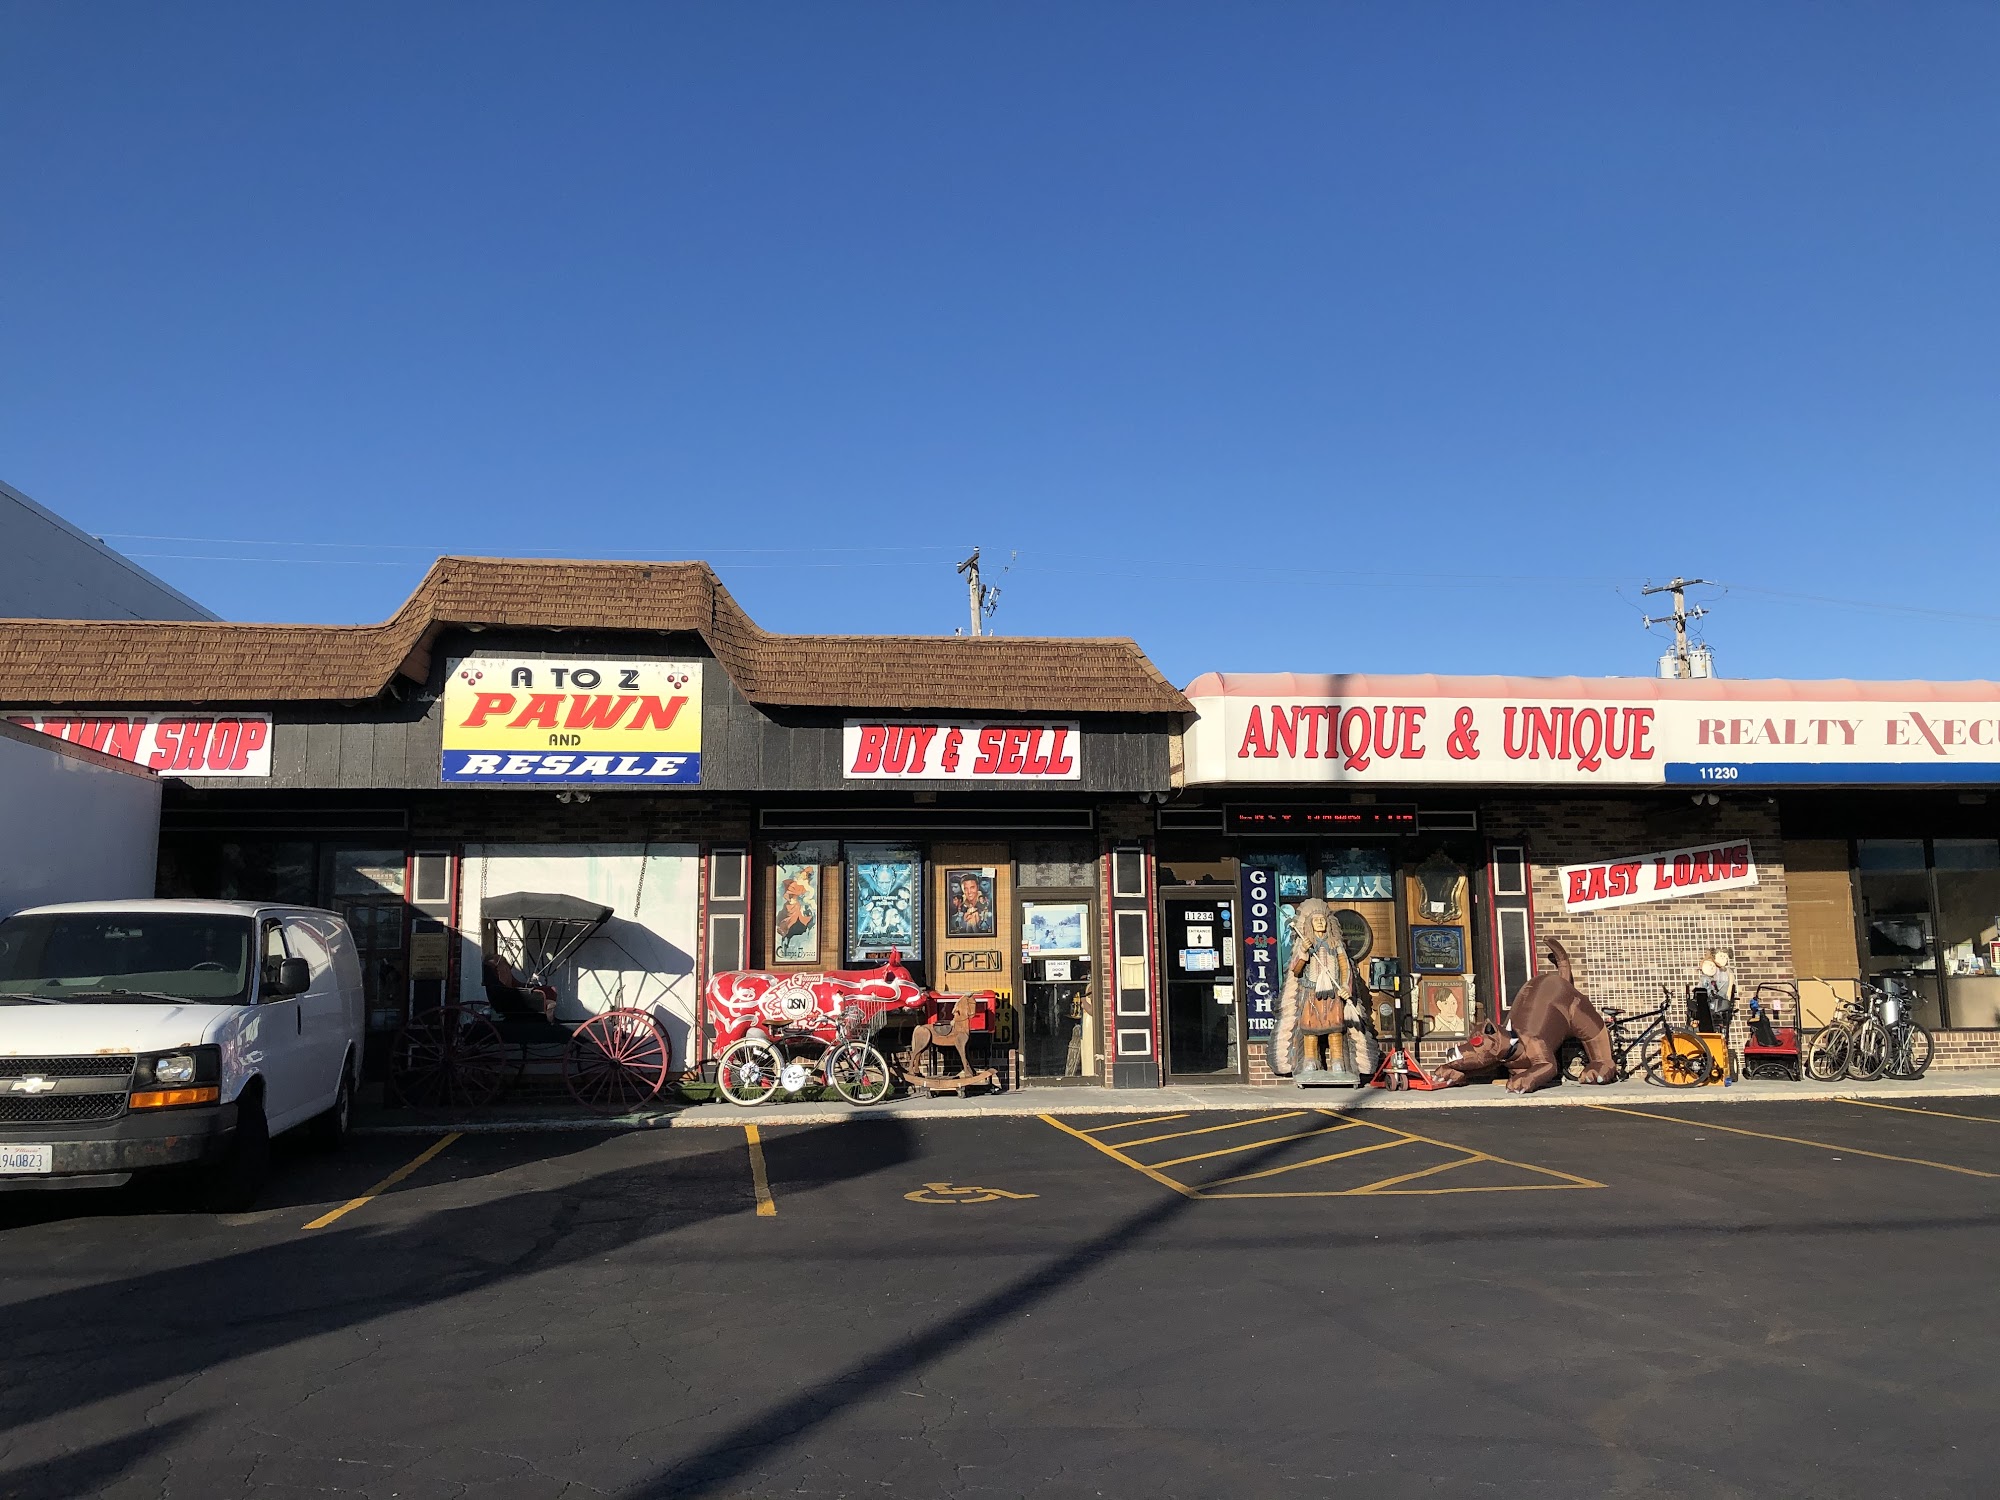 A to Z Pawn & Resale